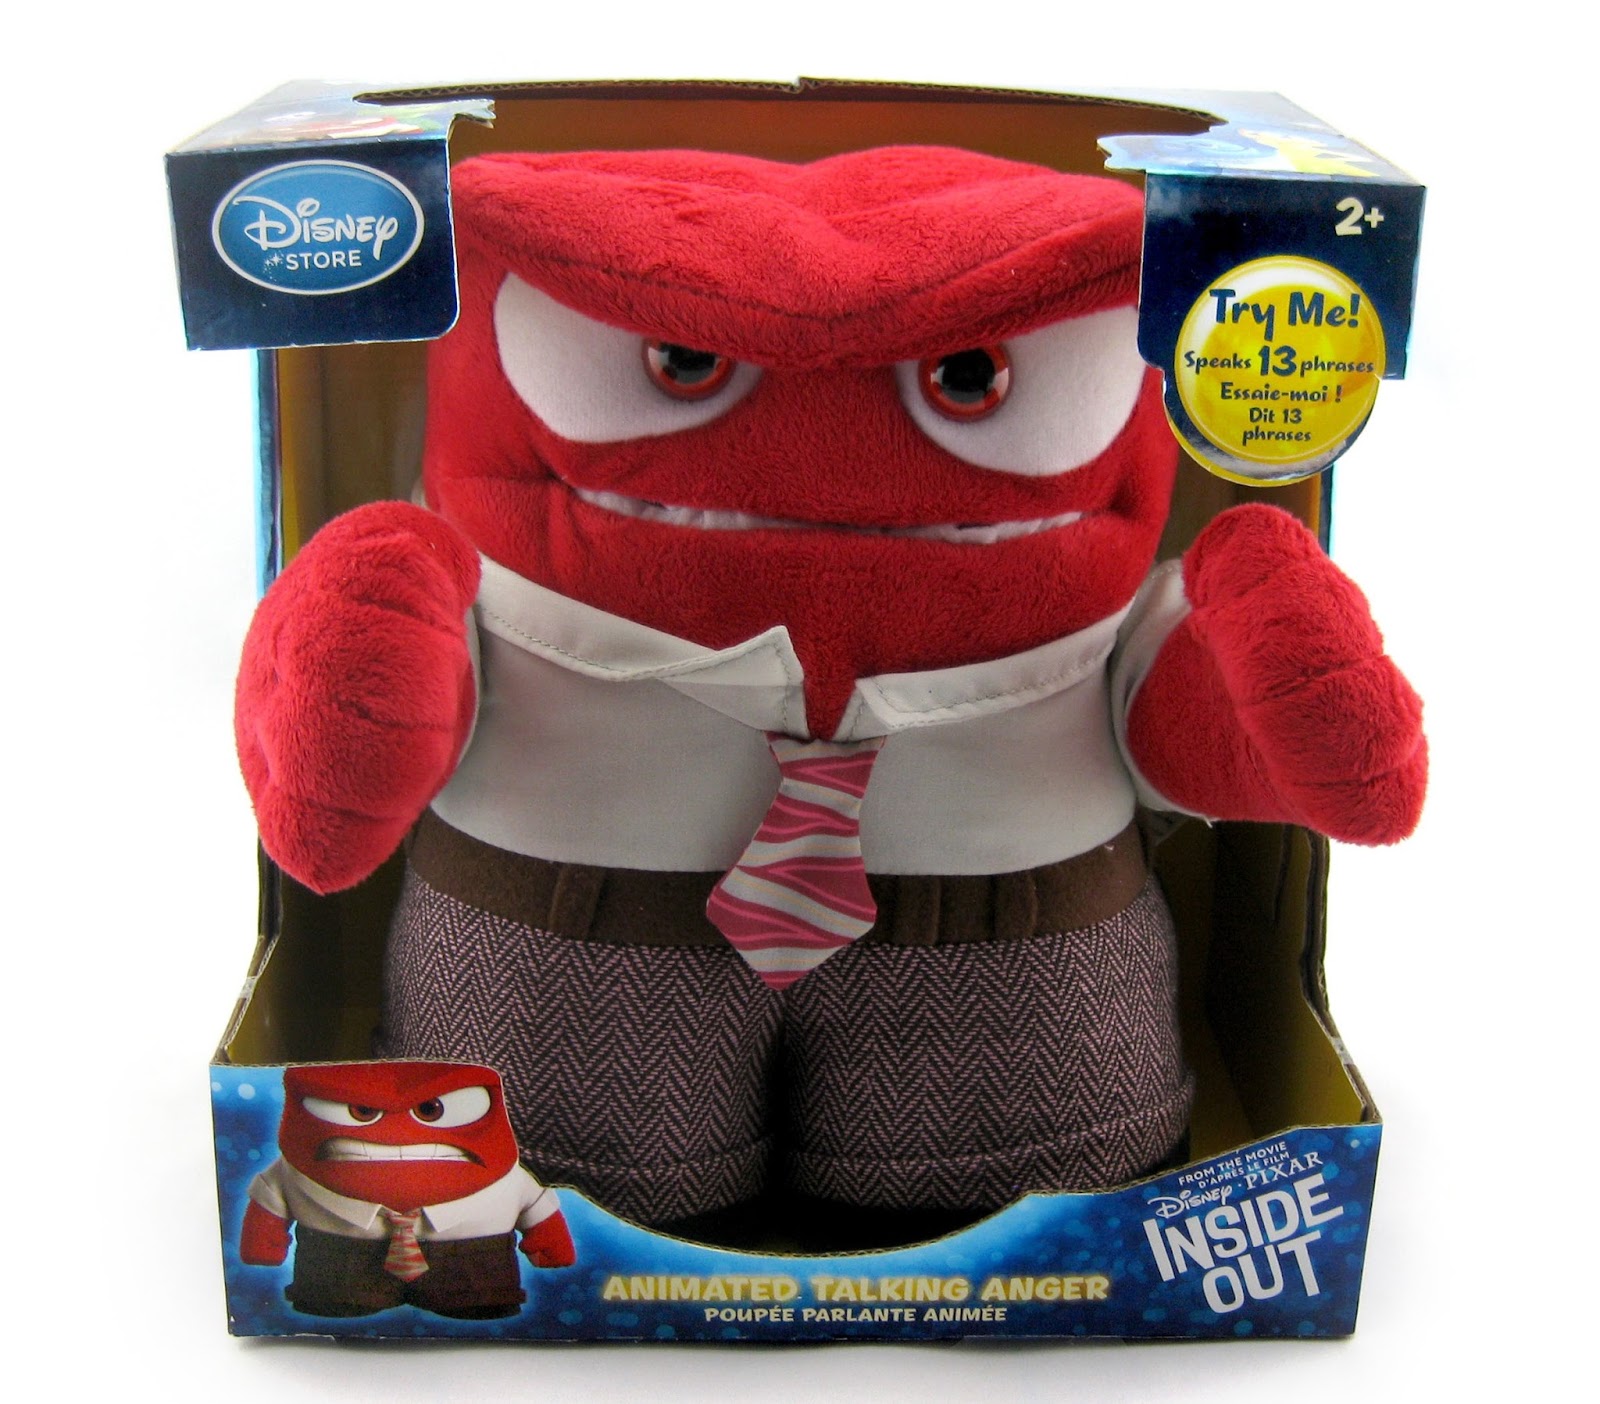 Anger Talking Animated Doll Disney Inside out Plush Authentic for sale online 